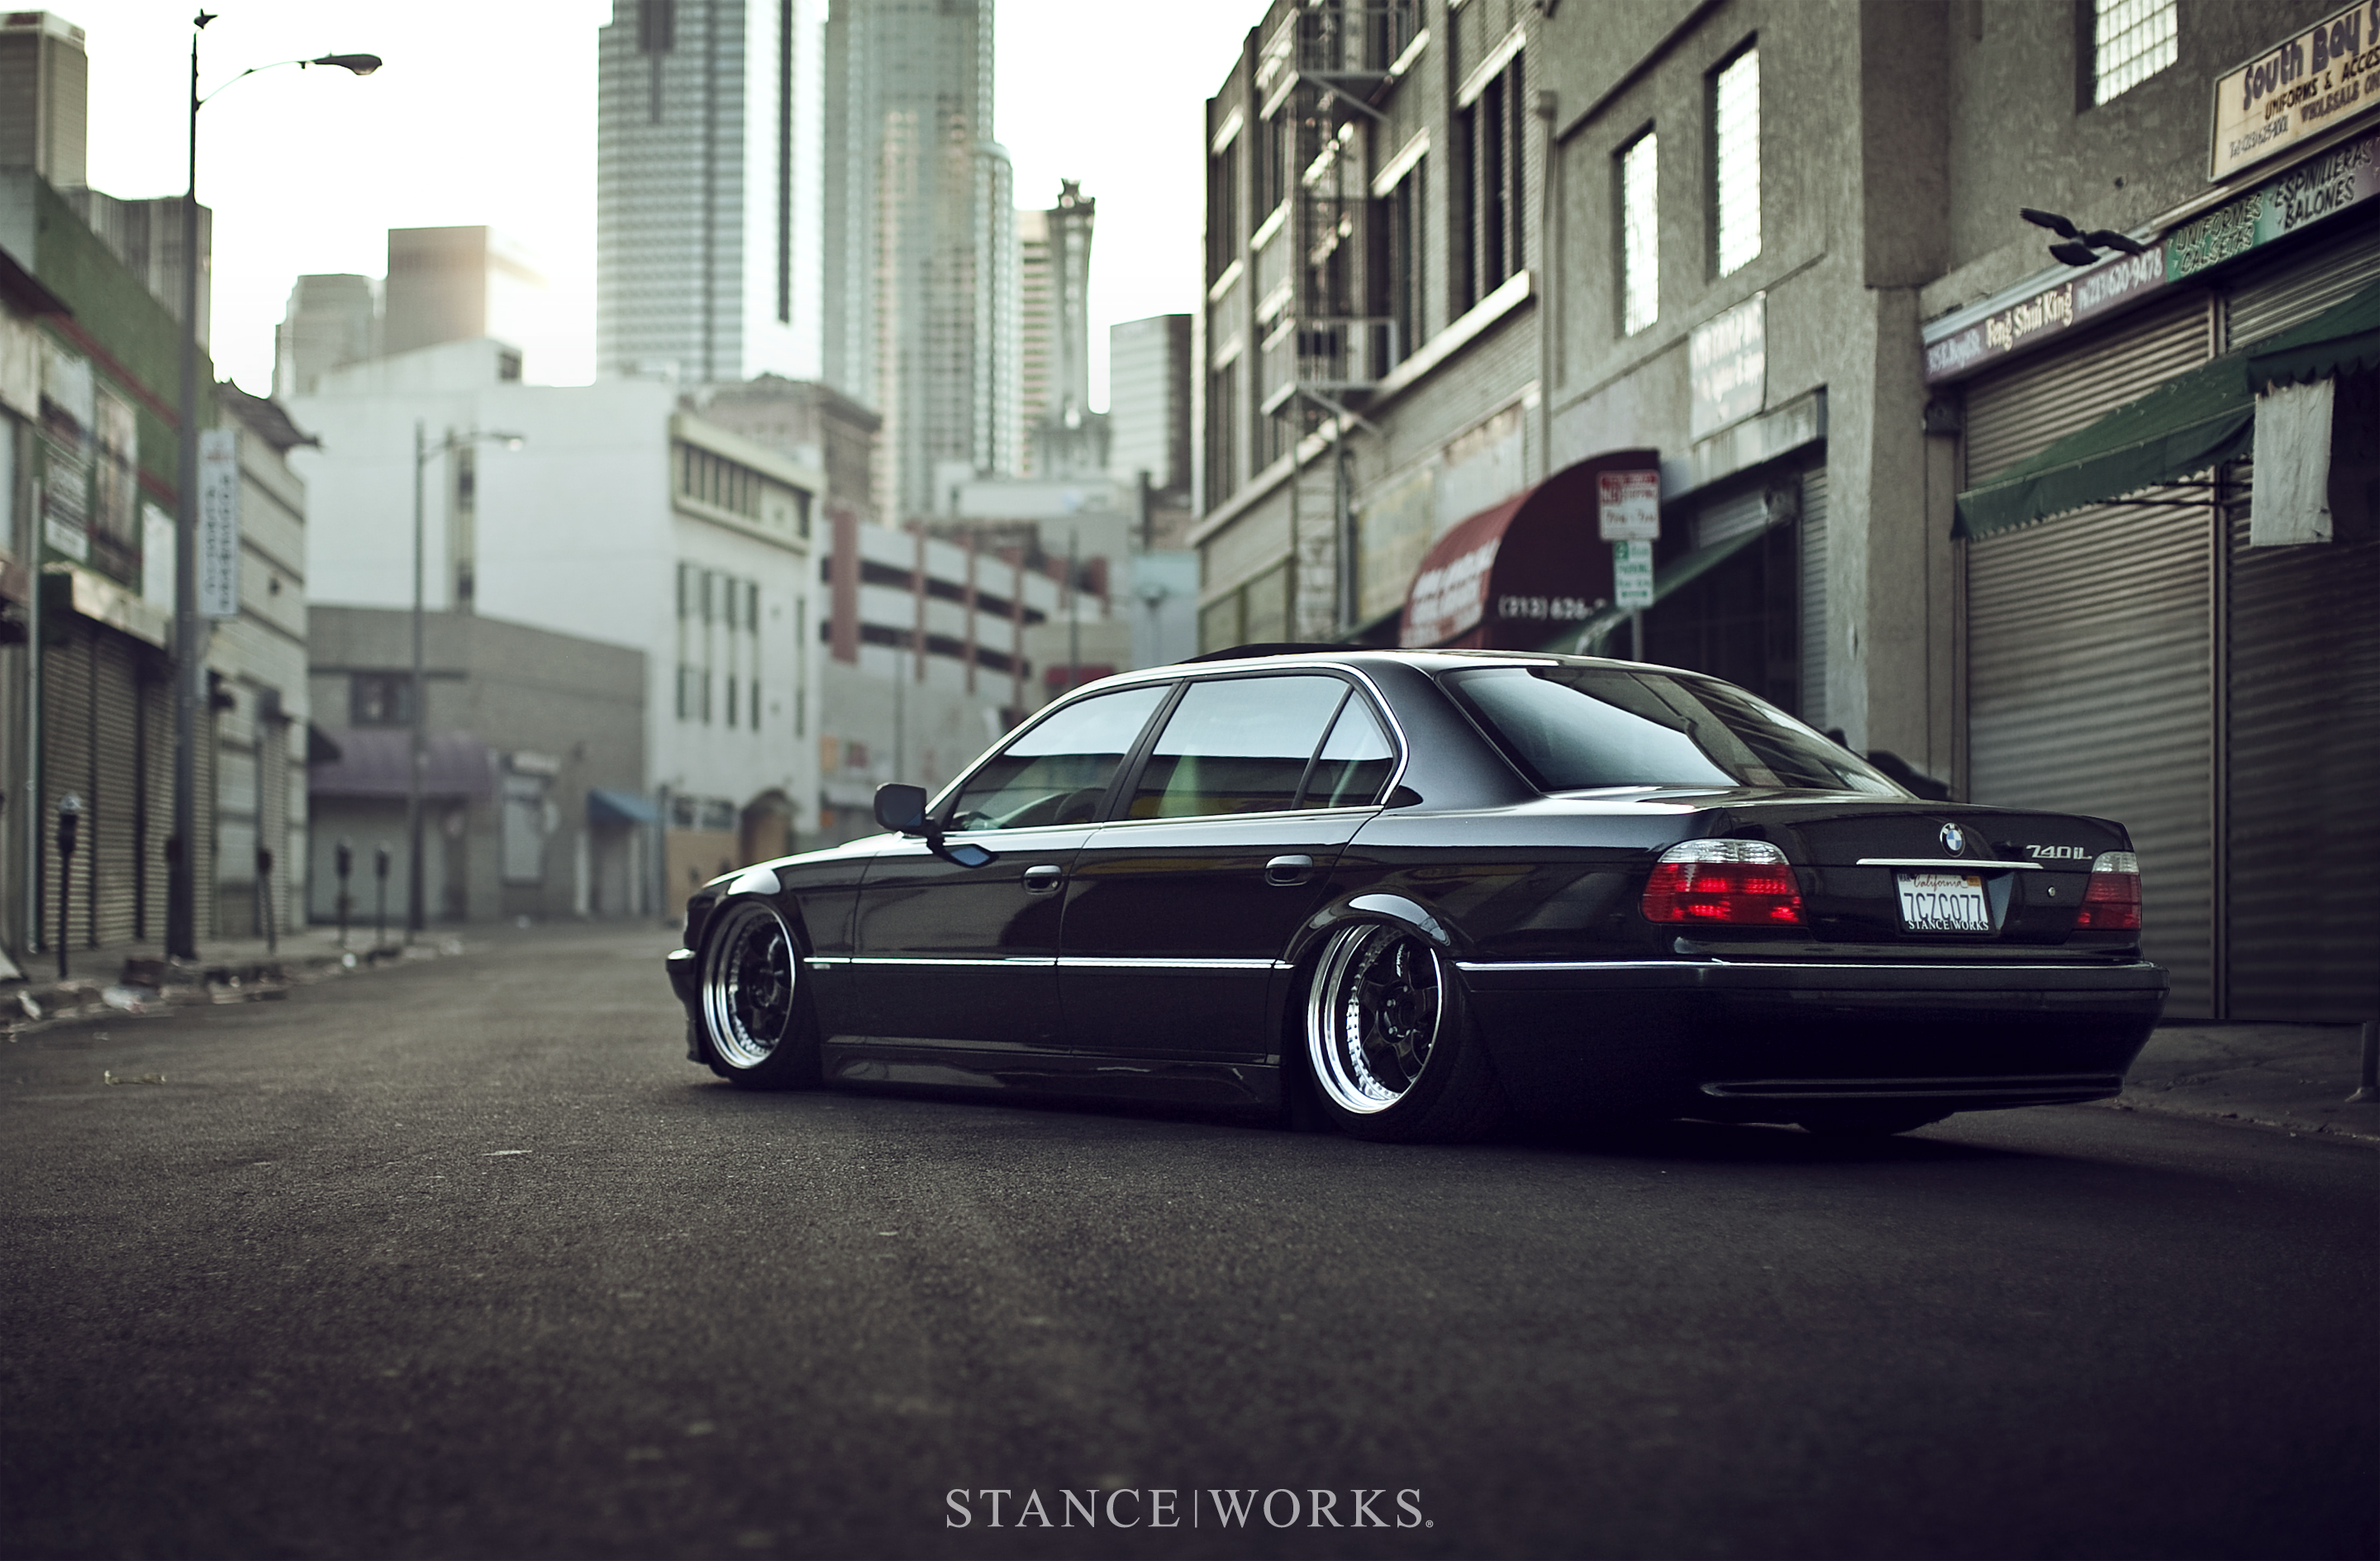 Free download STANCEWORKS Wallpaper Laid Out in LA Stance Works